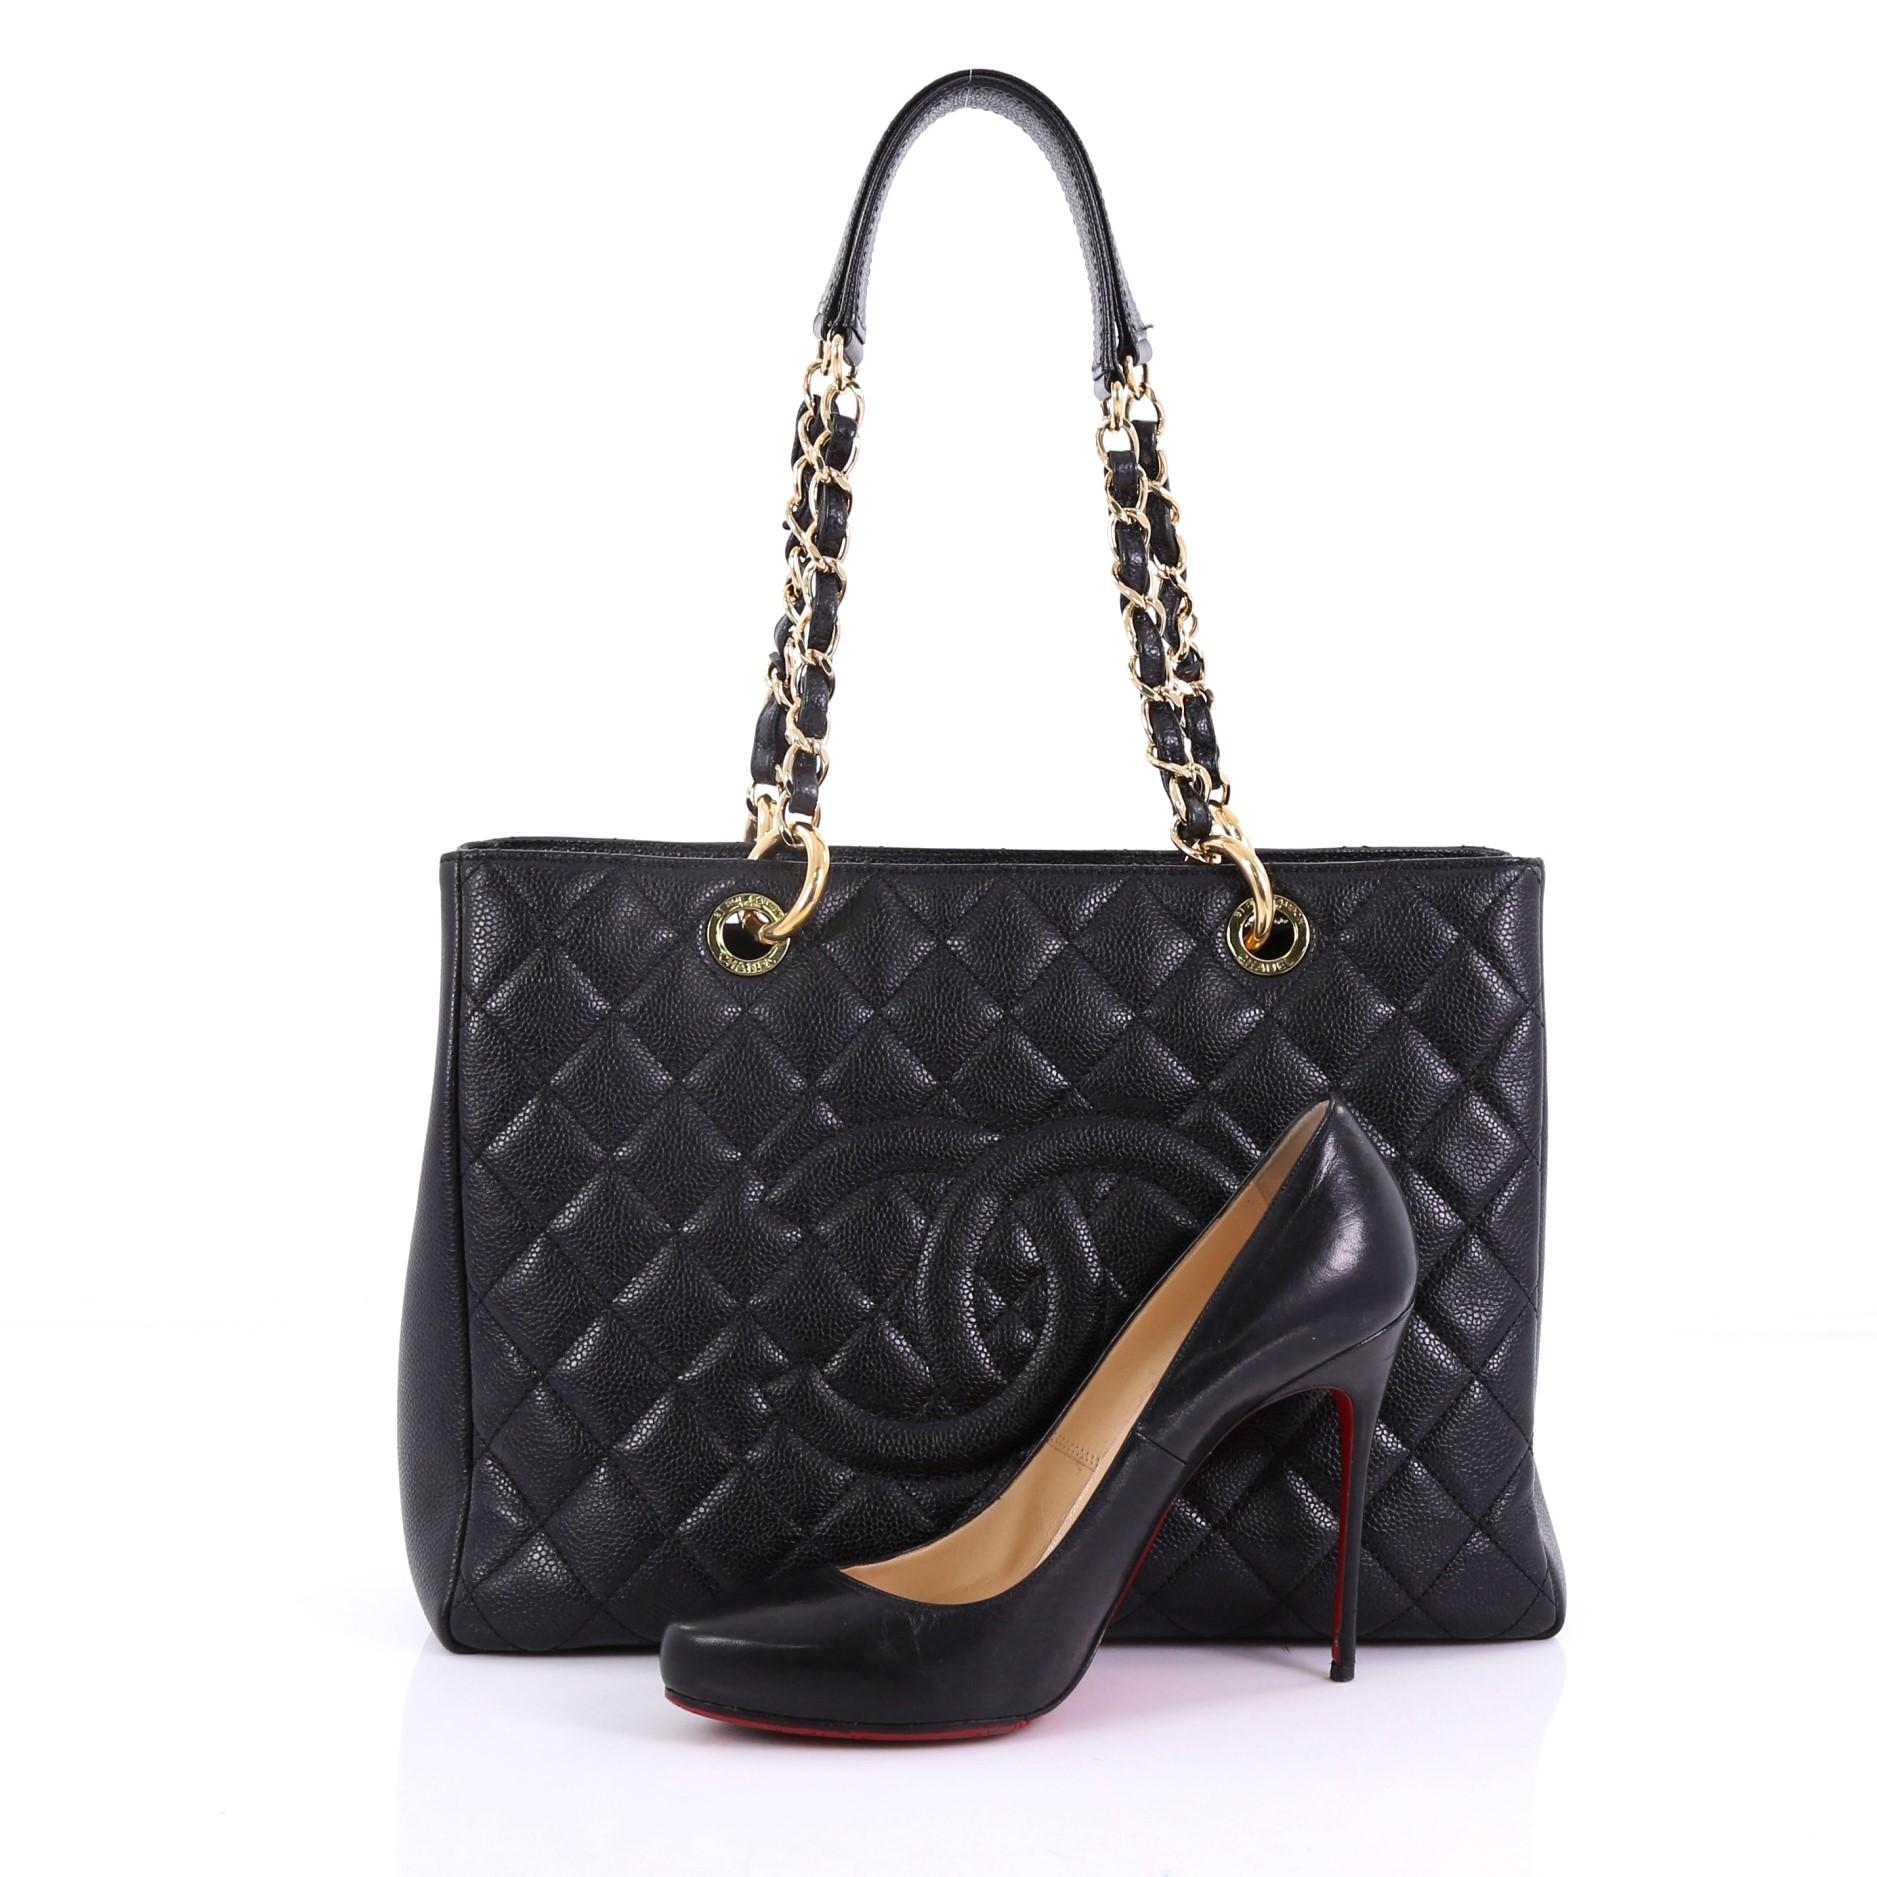 This Chanel Grand Shopping Tote Quilted Caviar, crafted in black quilted caviar leather, features woven-in leather chain straps with leather pads, exterior back pocket, and gold-tone hardware. It opens to a black satin interior with two open